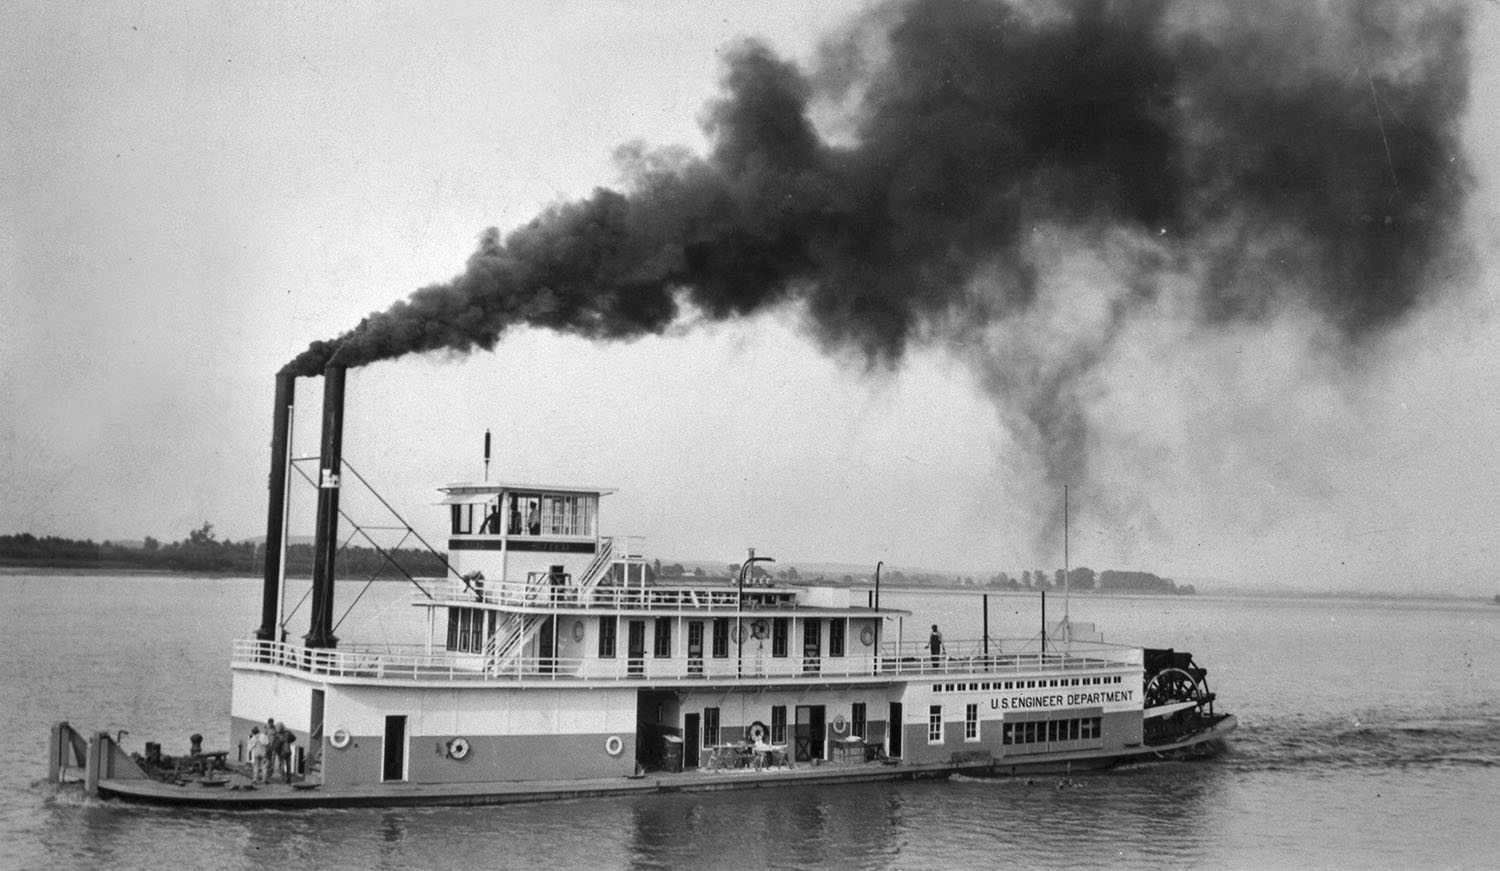 The Suter on trials at Gasconade, Mo., in 1928. (U.S. Engineers photo)